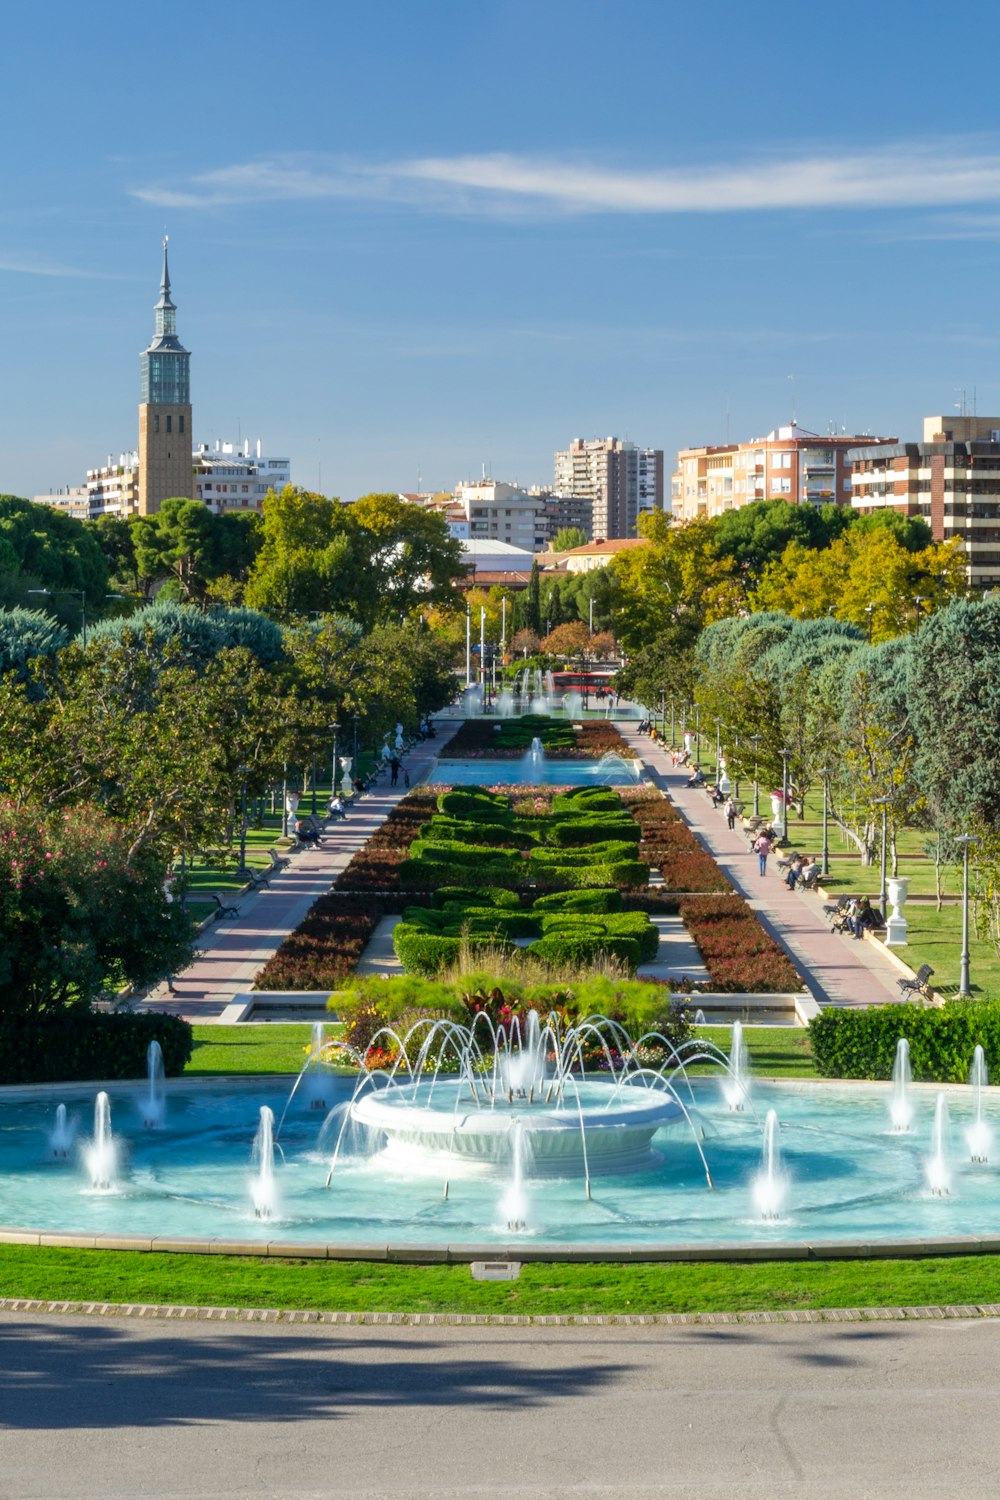 a view of a park with a fountain and buildings in the background